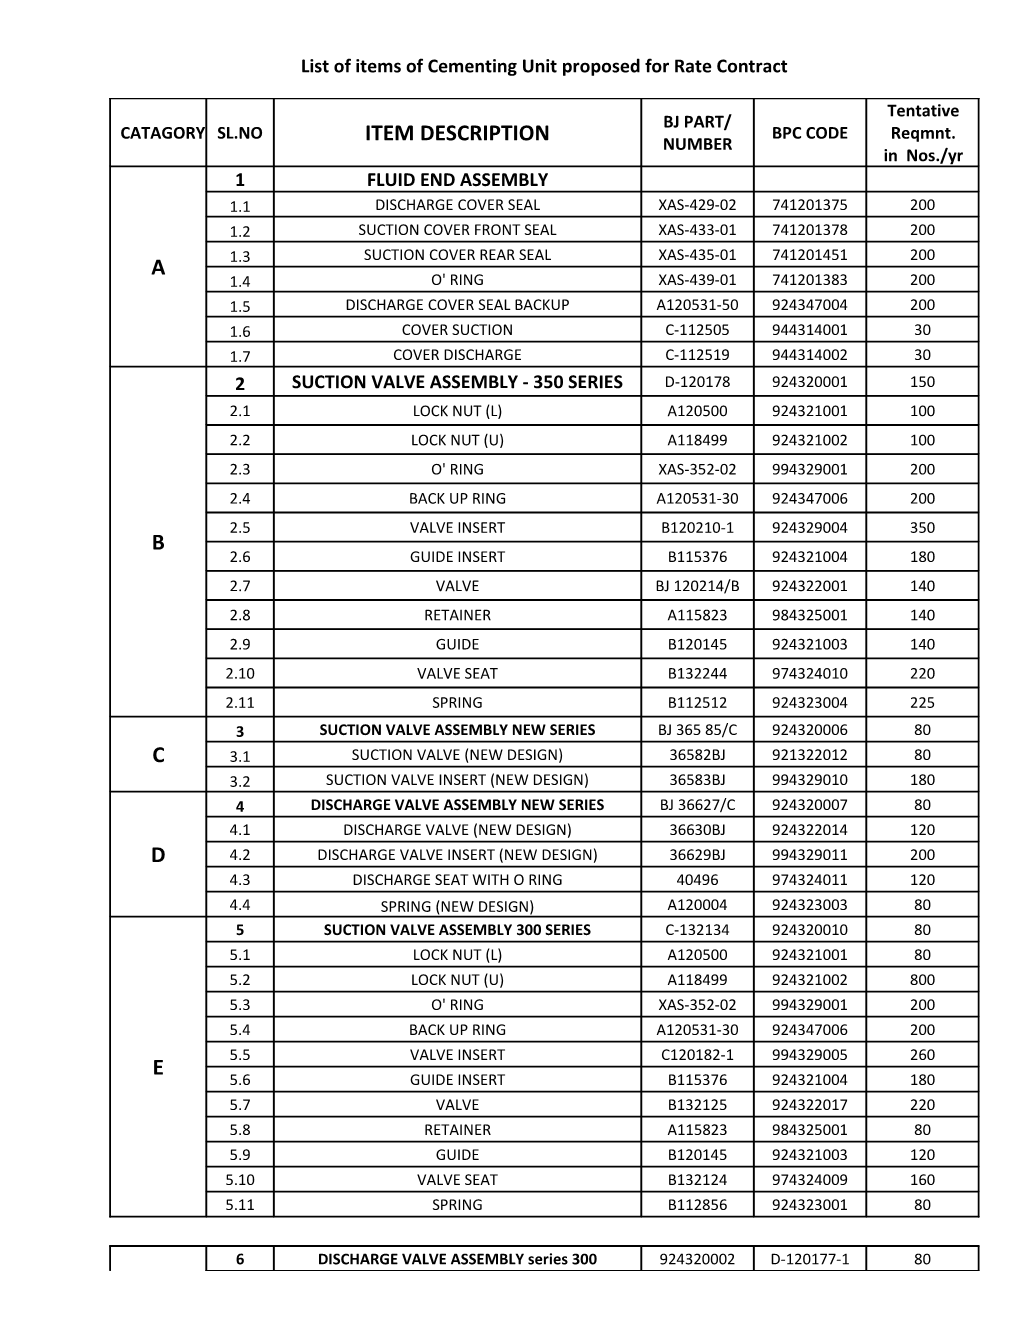 List of Items of Cementing Unit Proposed for Rate Contract